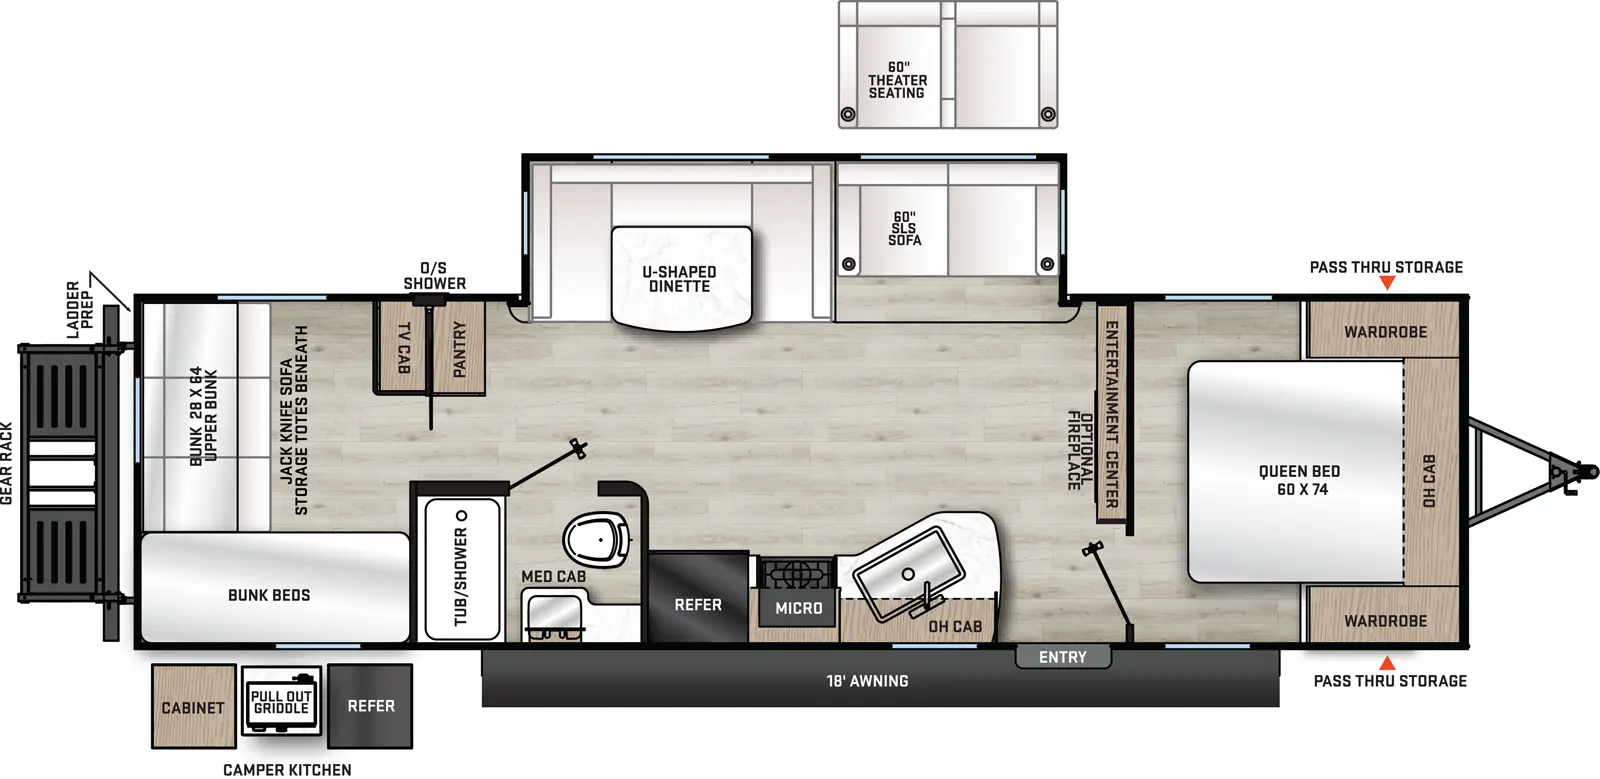 The 293QBCK has one slide out and one entry. Exterior includes an 18 foot awning, camper kitchen with cabinet, pull out griddle and refrigerator, front pass thru storage, outside shower, and rear cargo rack. Interior layout front to back: foot facing queen bed with overhead cabinet and wardrobes on each side; entertainment center along inner wall; off-door side slide out with sofa and u-shaped dinette; door side entry, kitchen counter with sink, overhead cabinet, cook top stove, microwave, and refrigerator; door side full bathroom with medicine cabinet; rear bunk room with door side bunk beds, wardrobe, rear COA cubes with upper bunk, and off-door side TV cabinet and wardrobe.